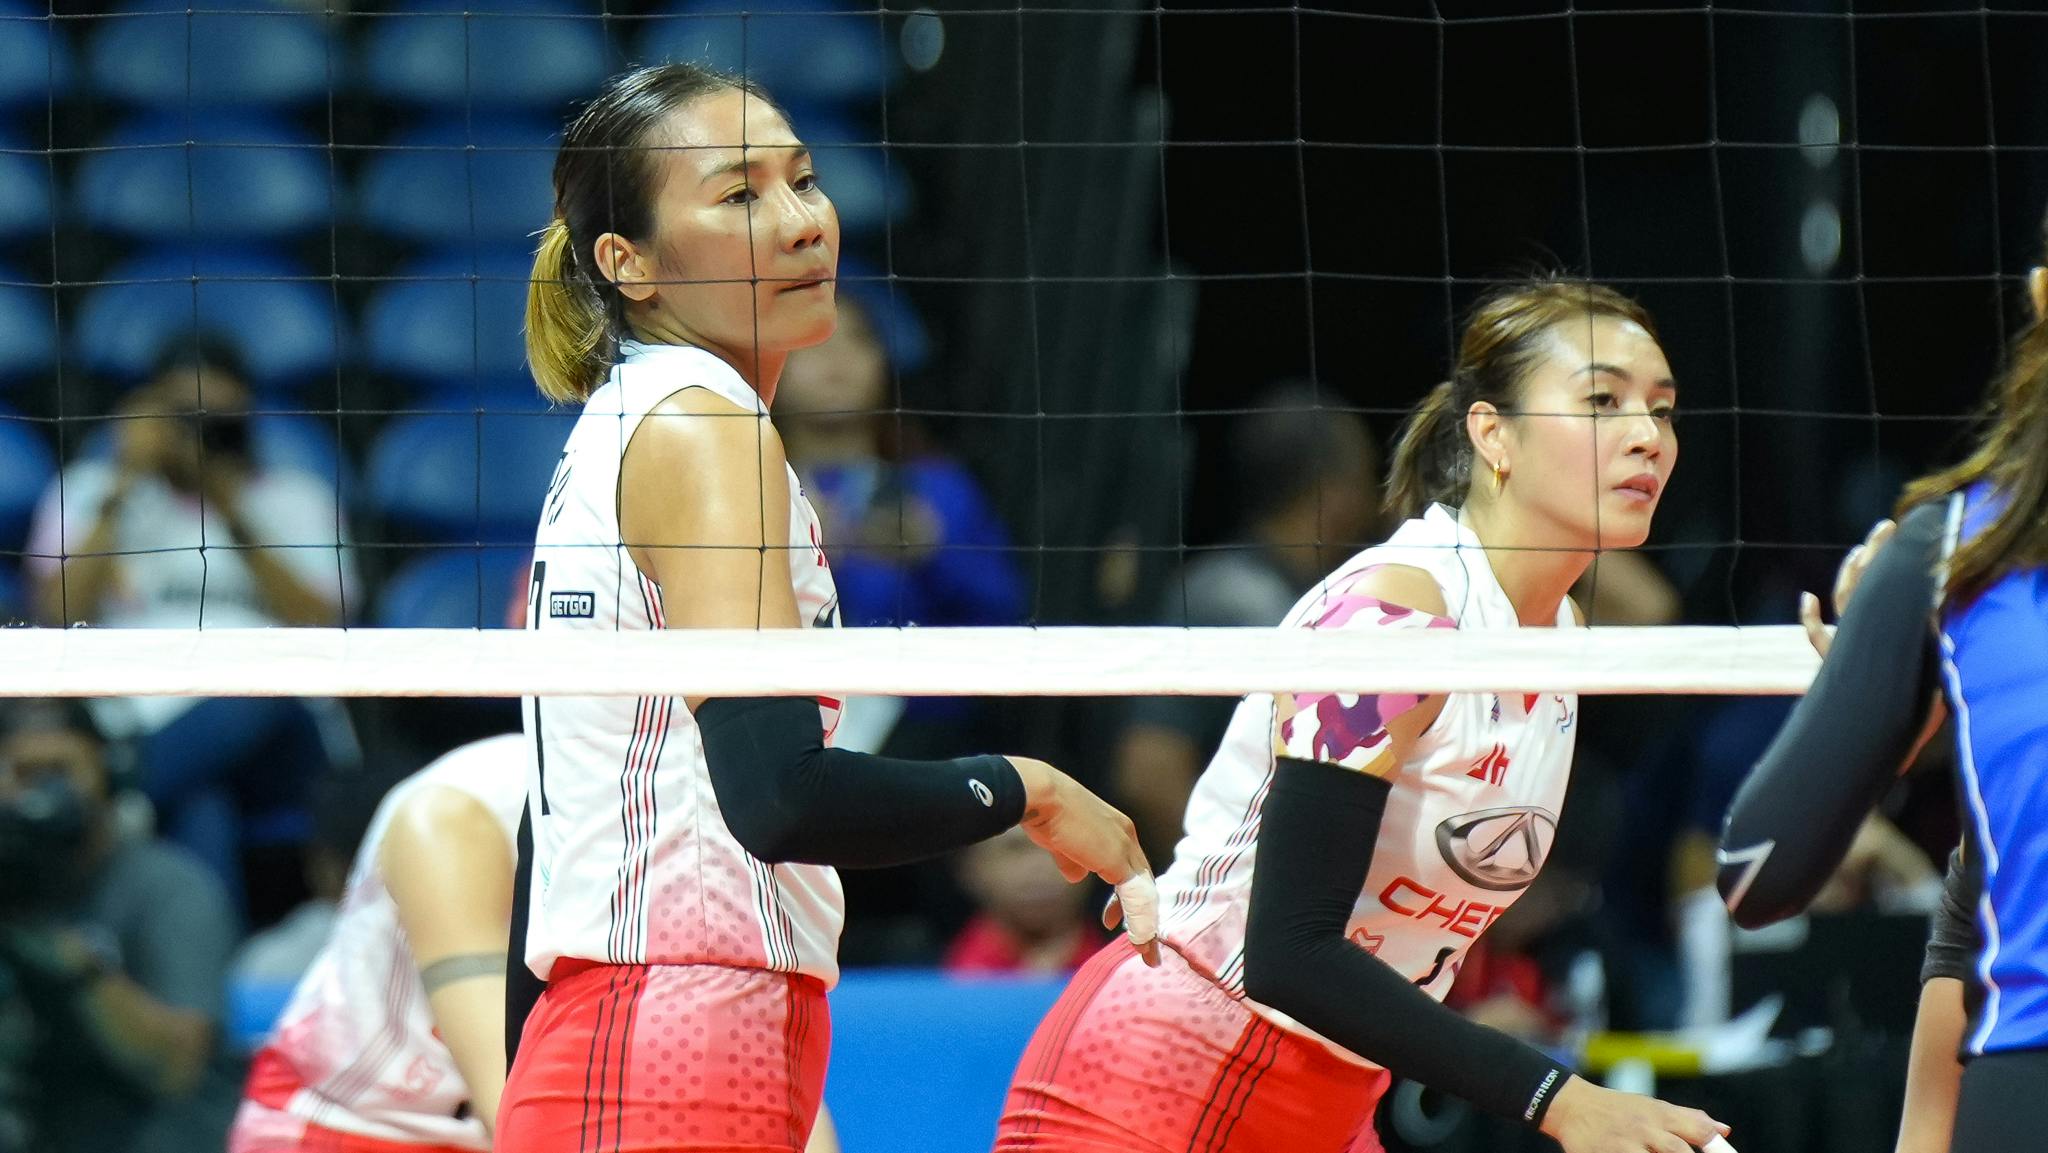 PVL: Playing with best friend Aby Maraño a boost for Chery Tiggo